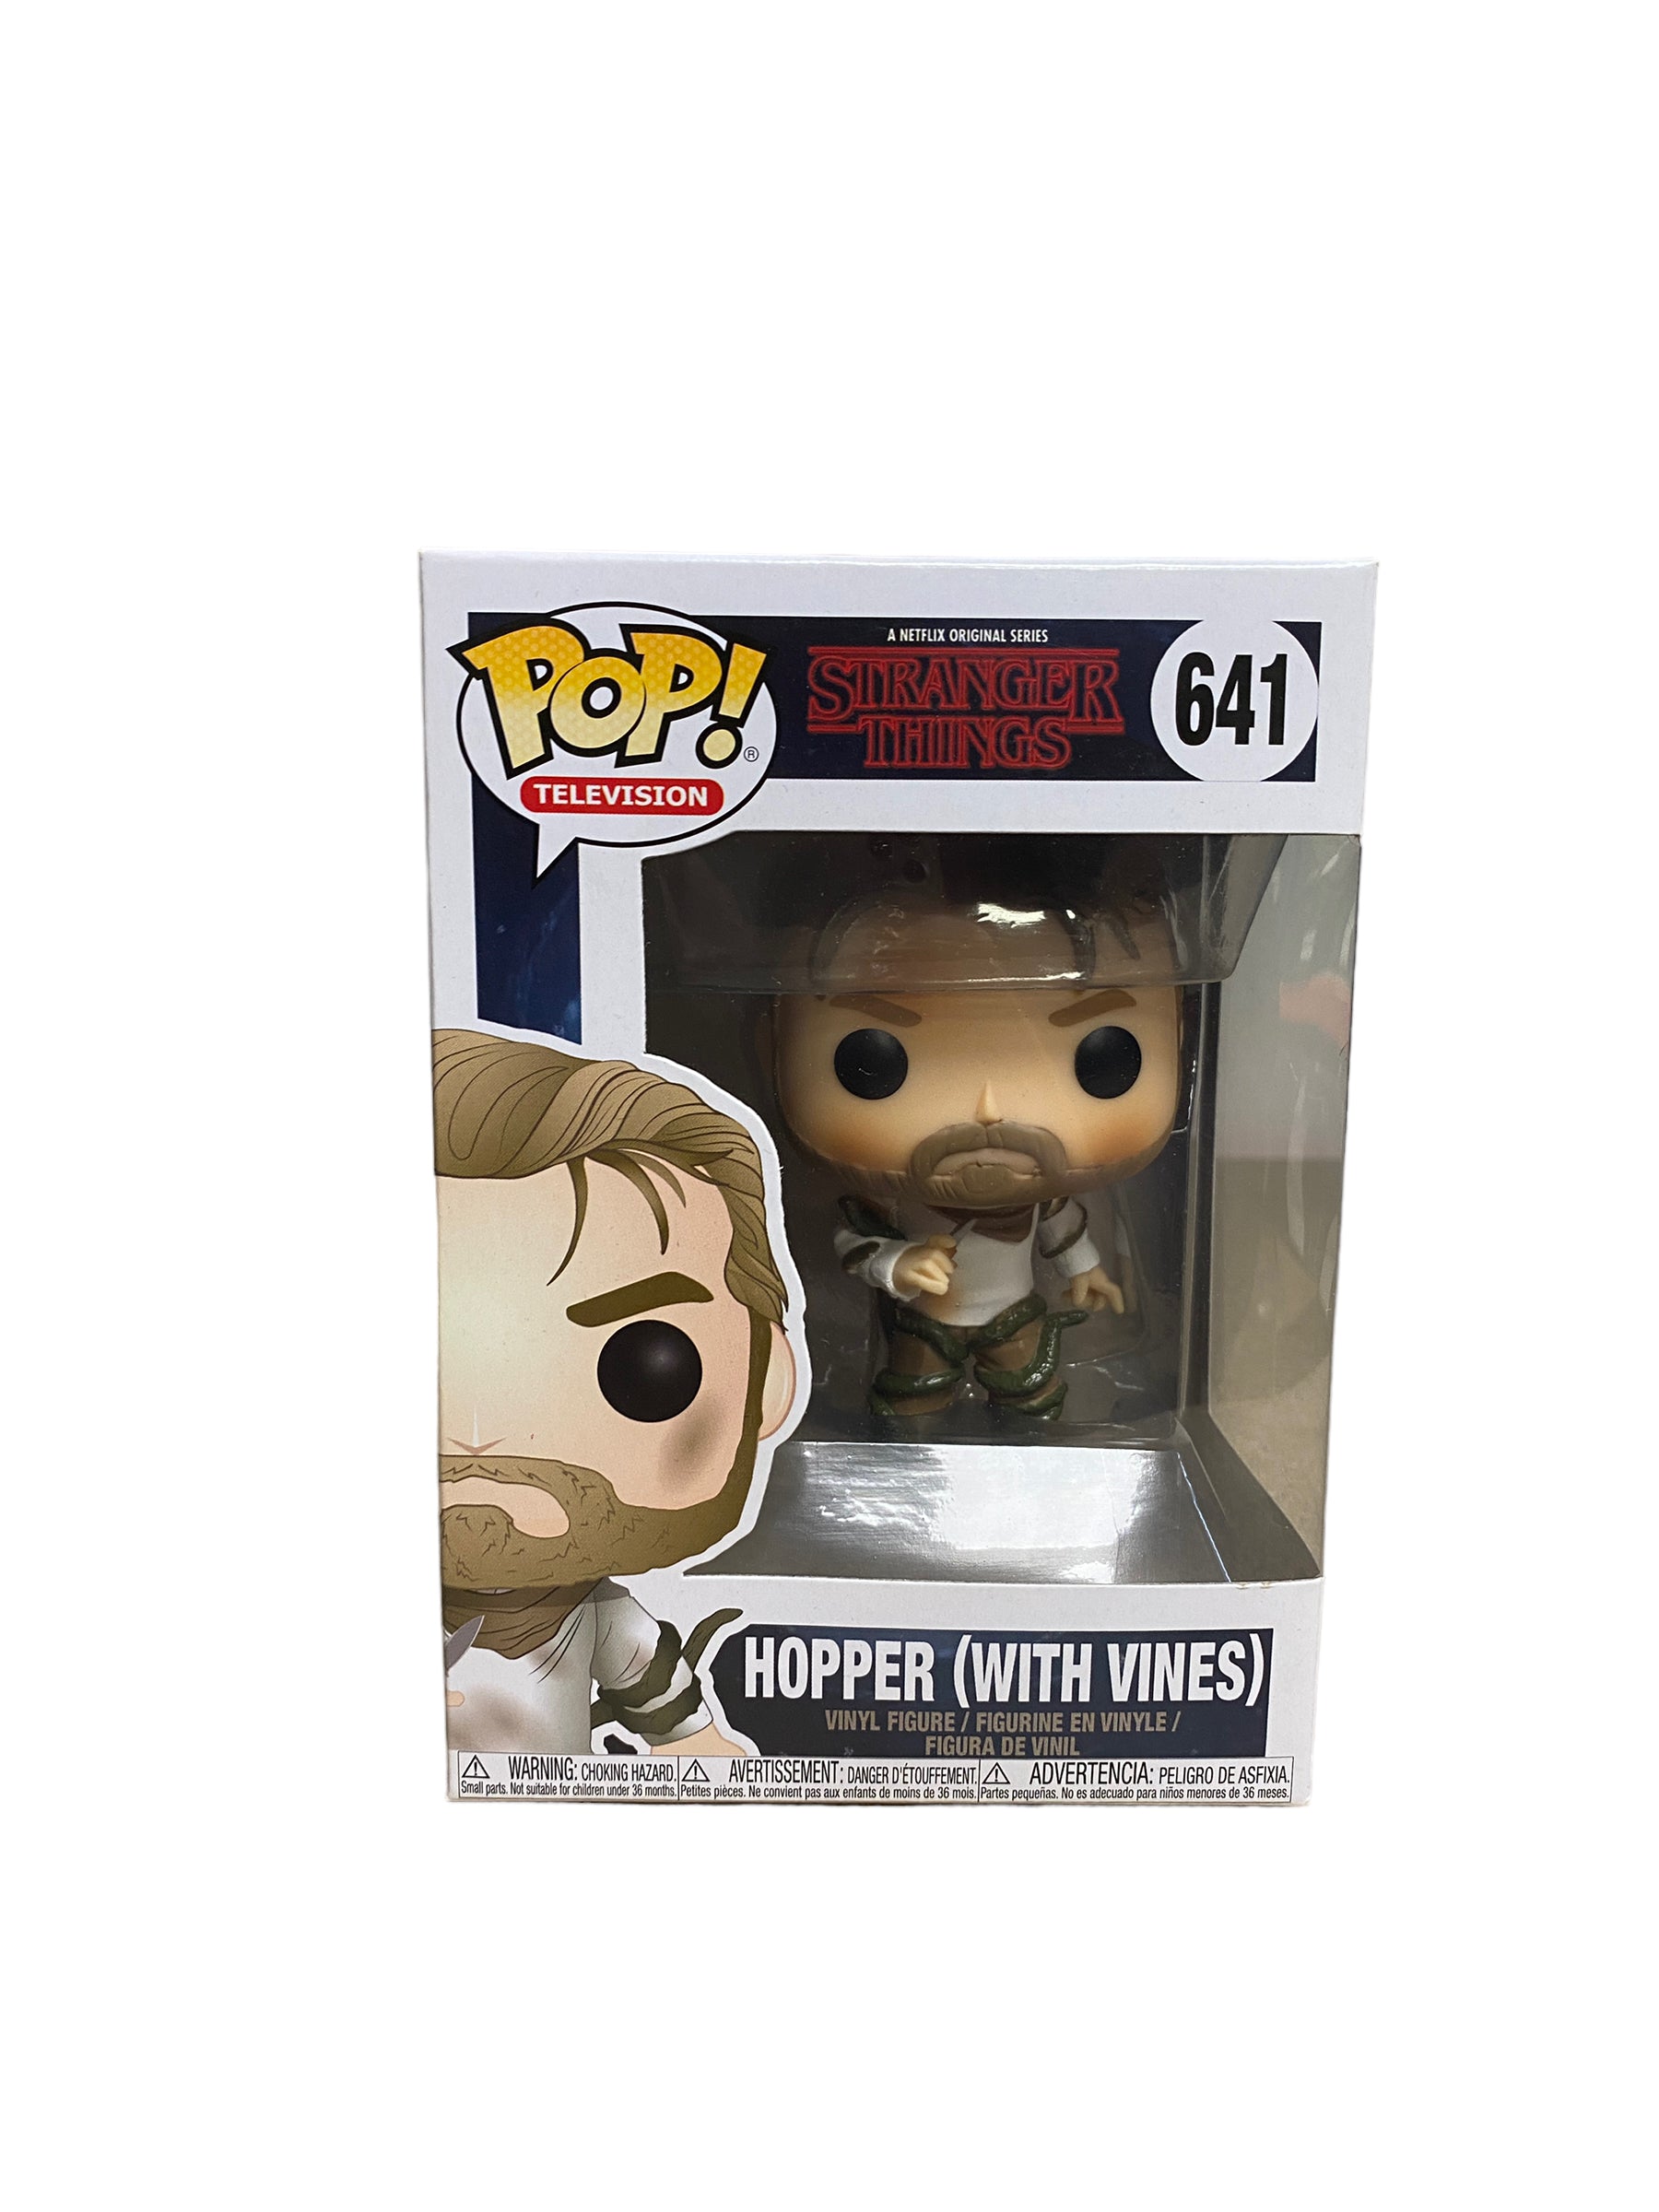 Hopper (With Vines) #641 Funko Pop! - Stranger Things - 2018 Pop! - Condition 8.5/10